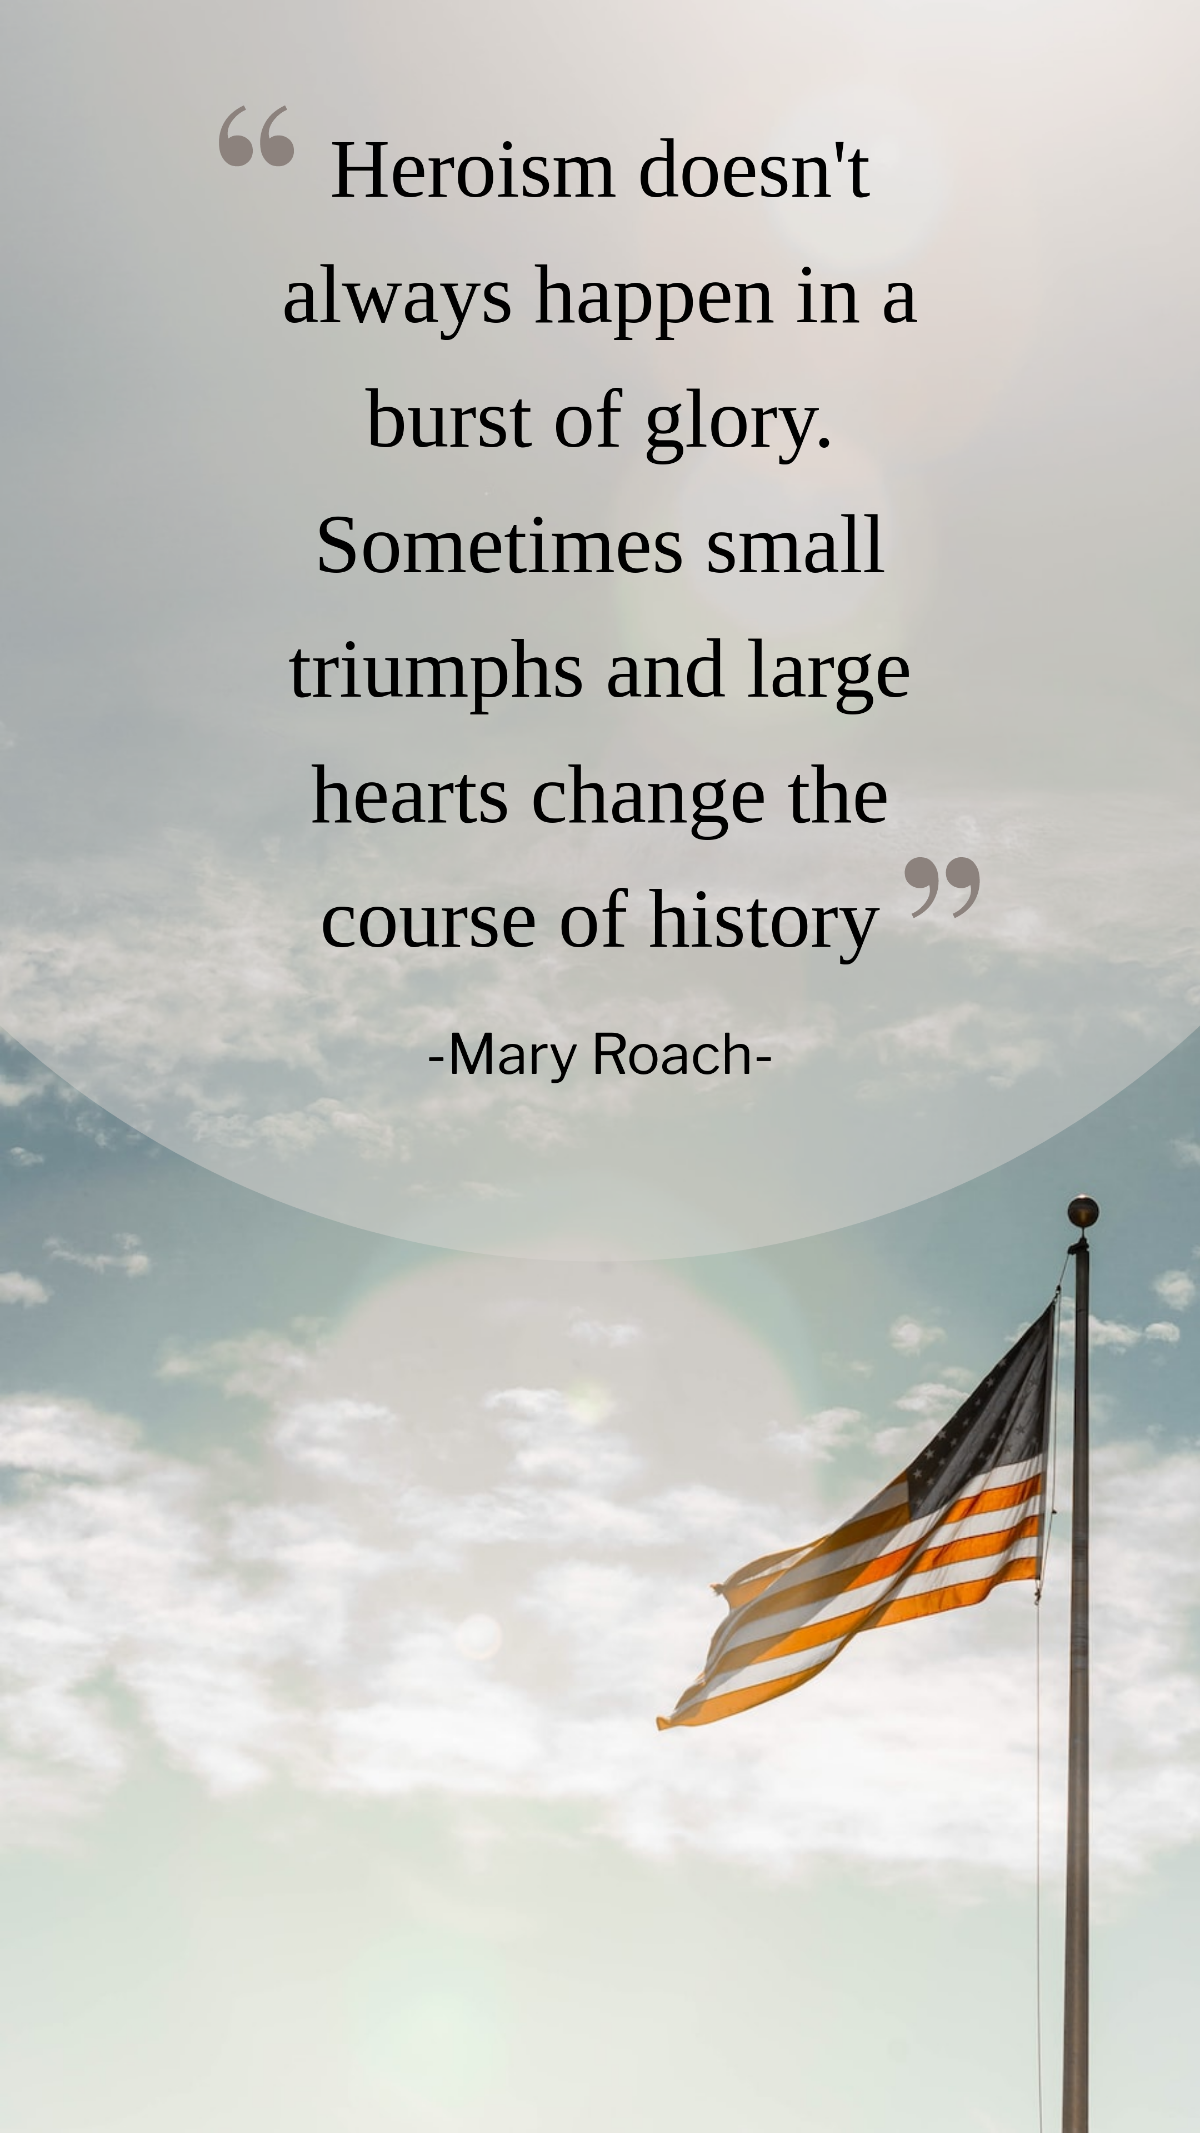 Mary Roach - Heroism doesn't always happen in a burst of glory. Sometimes small triumphs and large hearts change the course of history Template